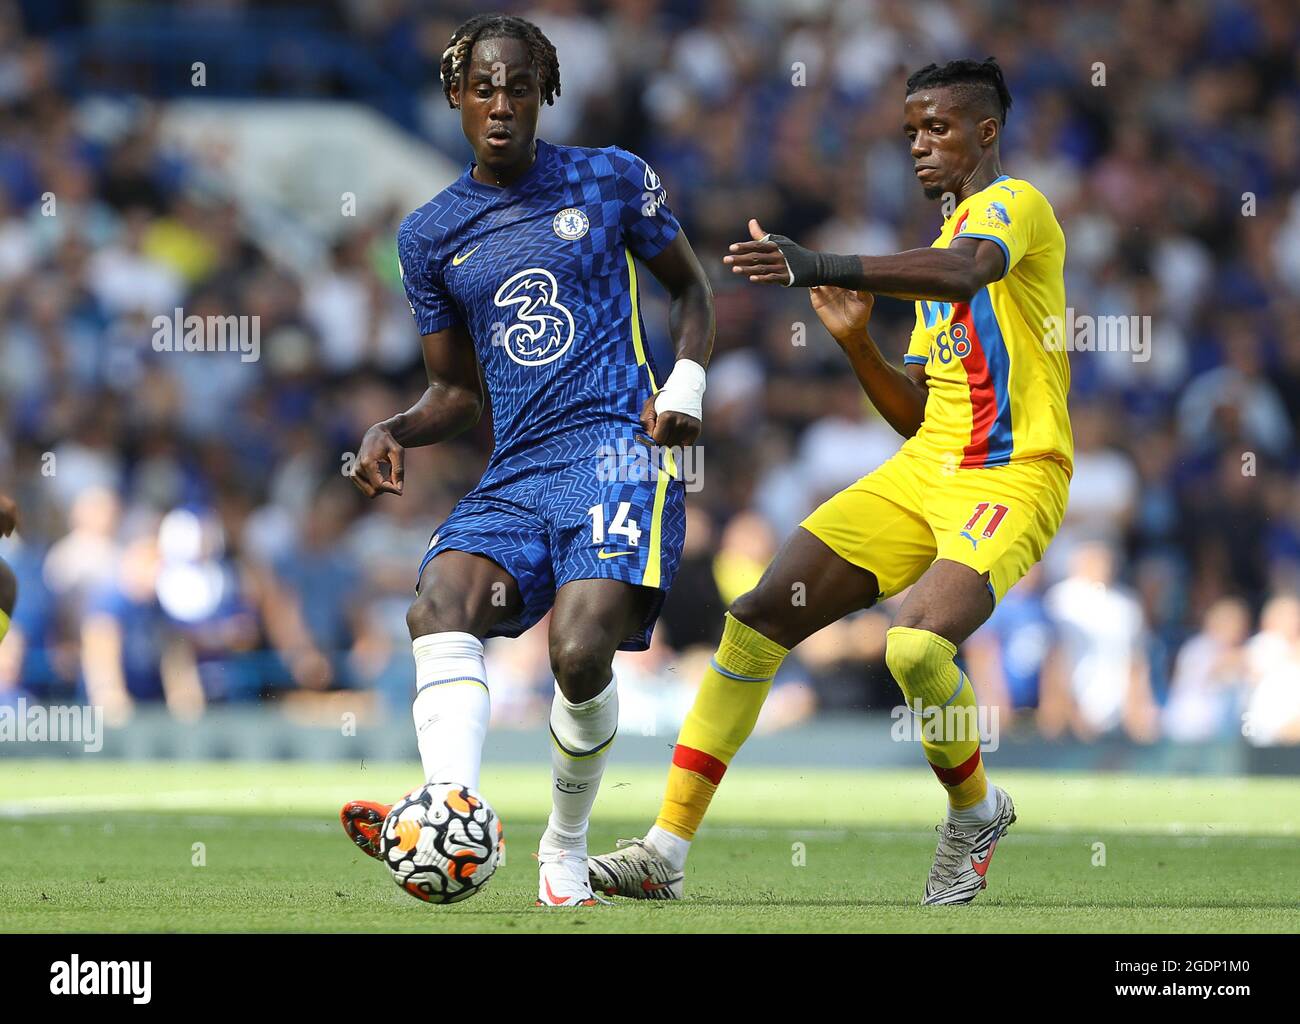 London, England, 14th August 2021. Trevor Chalobah of Chelsea and Wilfried Zaha of Crystal Palace during the Premier League match at Stamford Bridge, London. Picture credit should read: Paul Terry / Sportimage Stock Photo